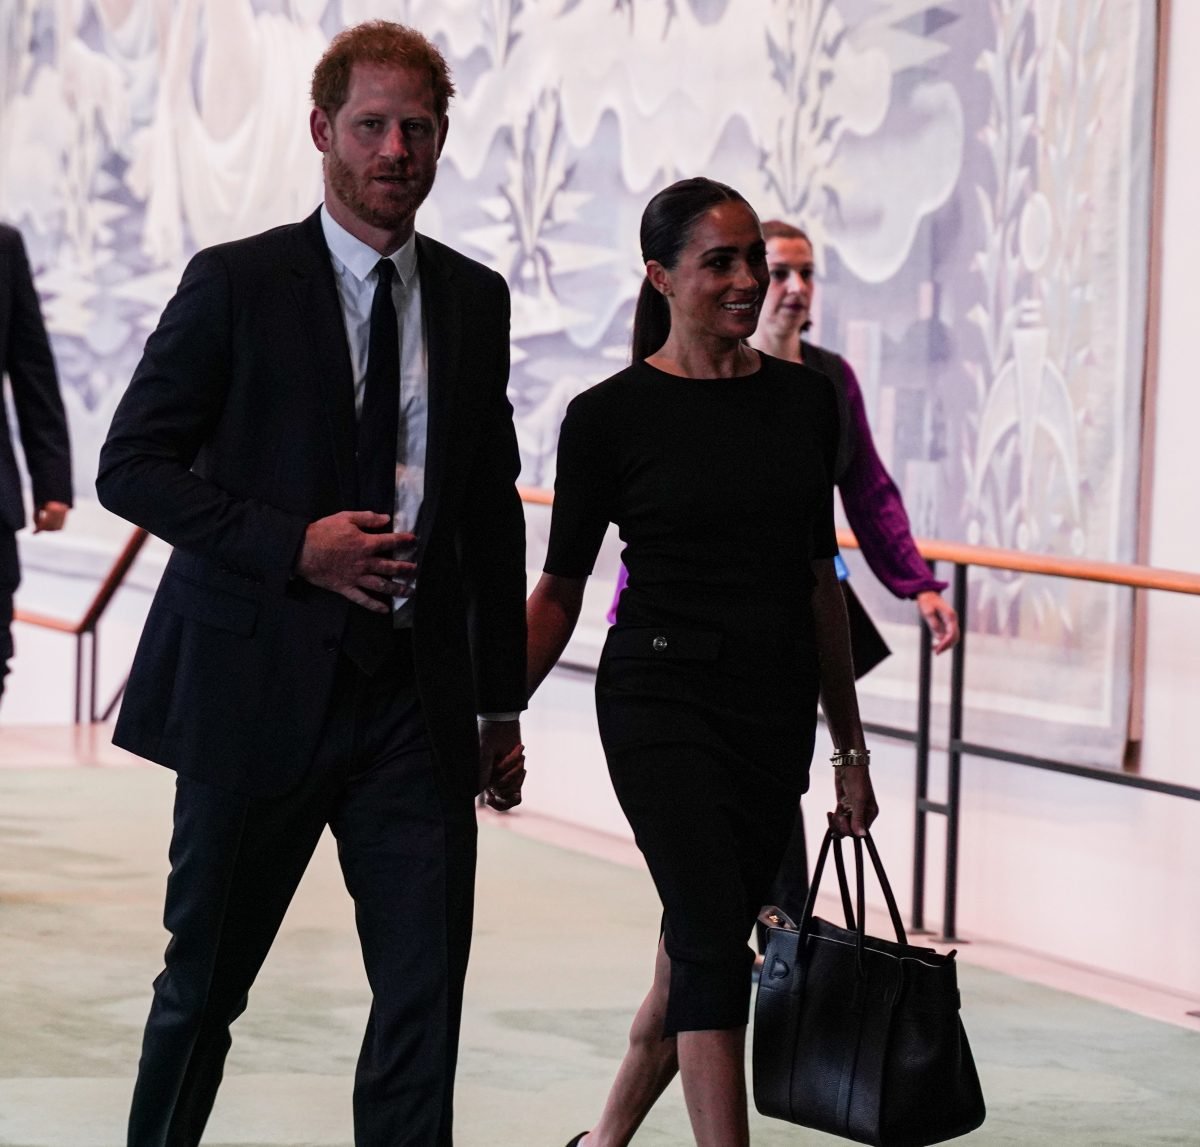 Prince Harry and Meghan Markle arrive to celebrate Nelson Mandela International Day at the United Nations Headquarters in New York City